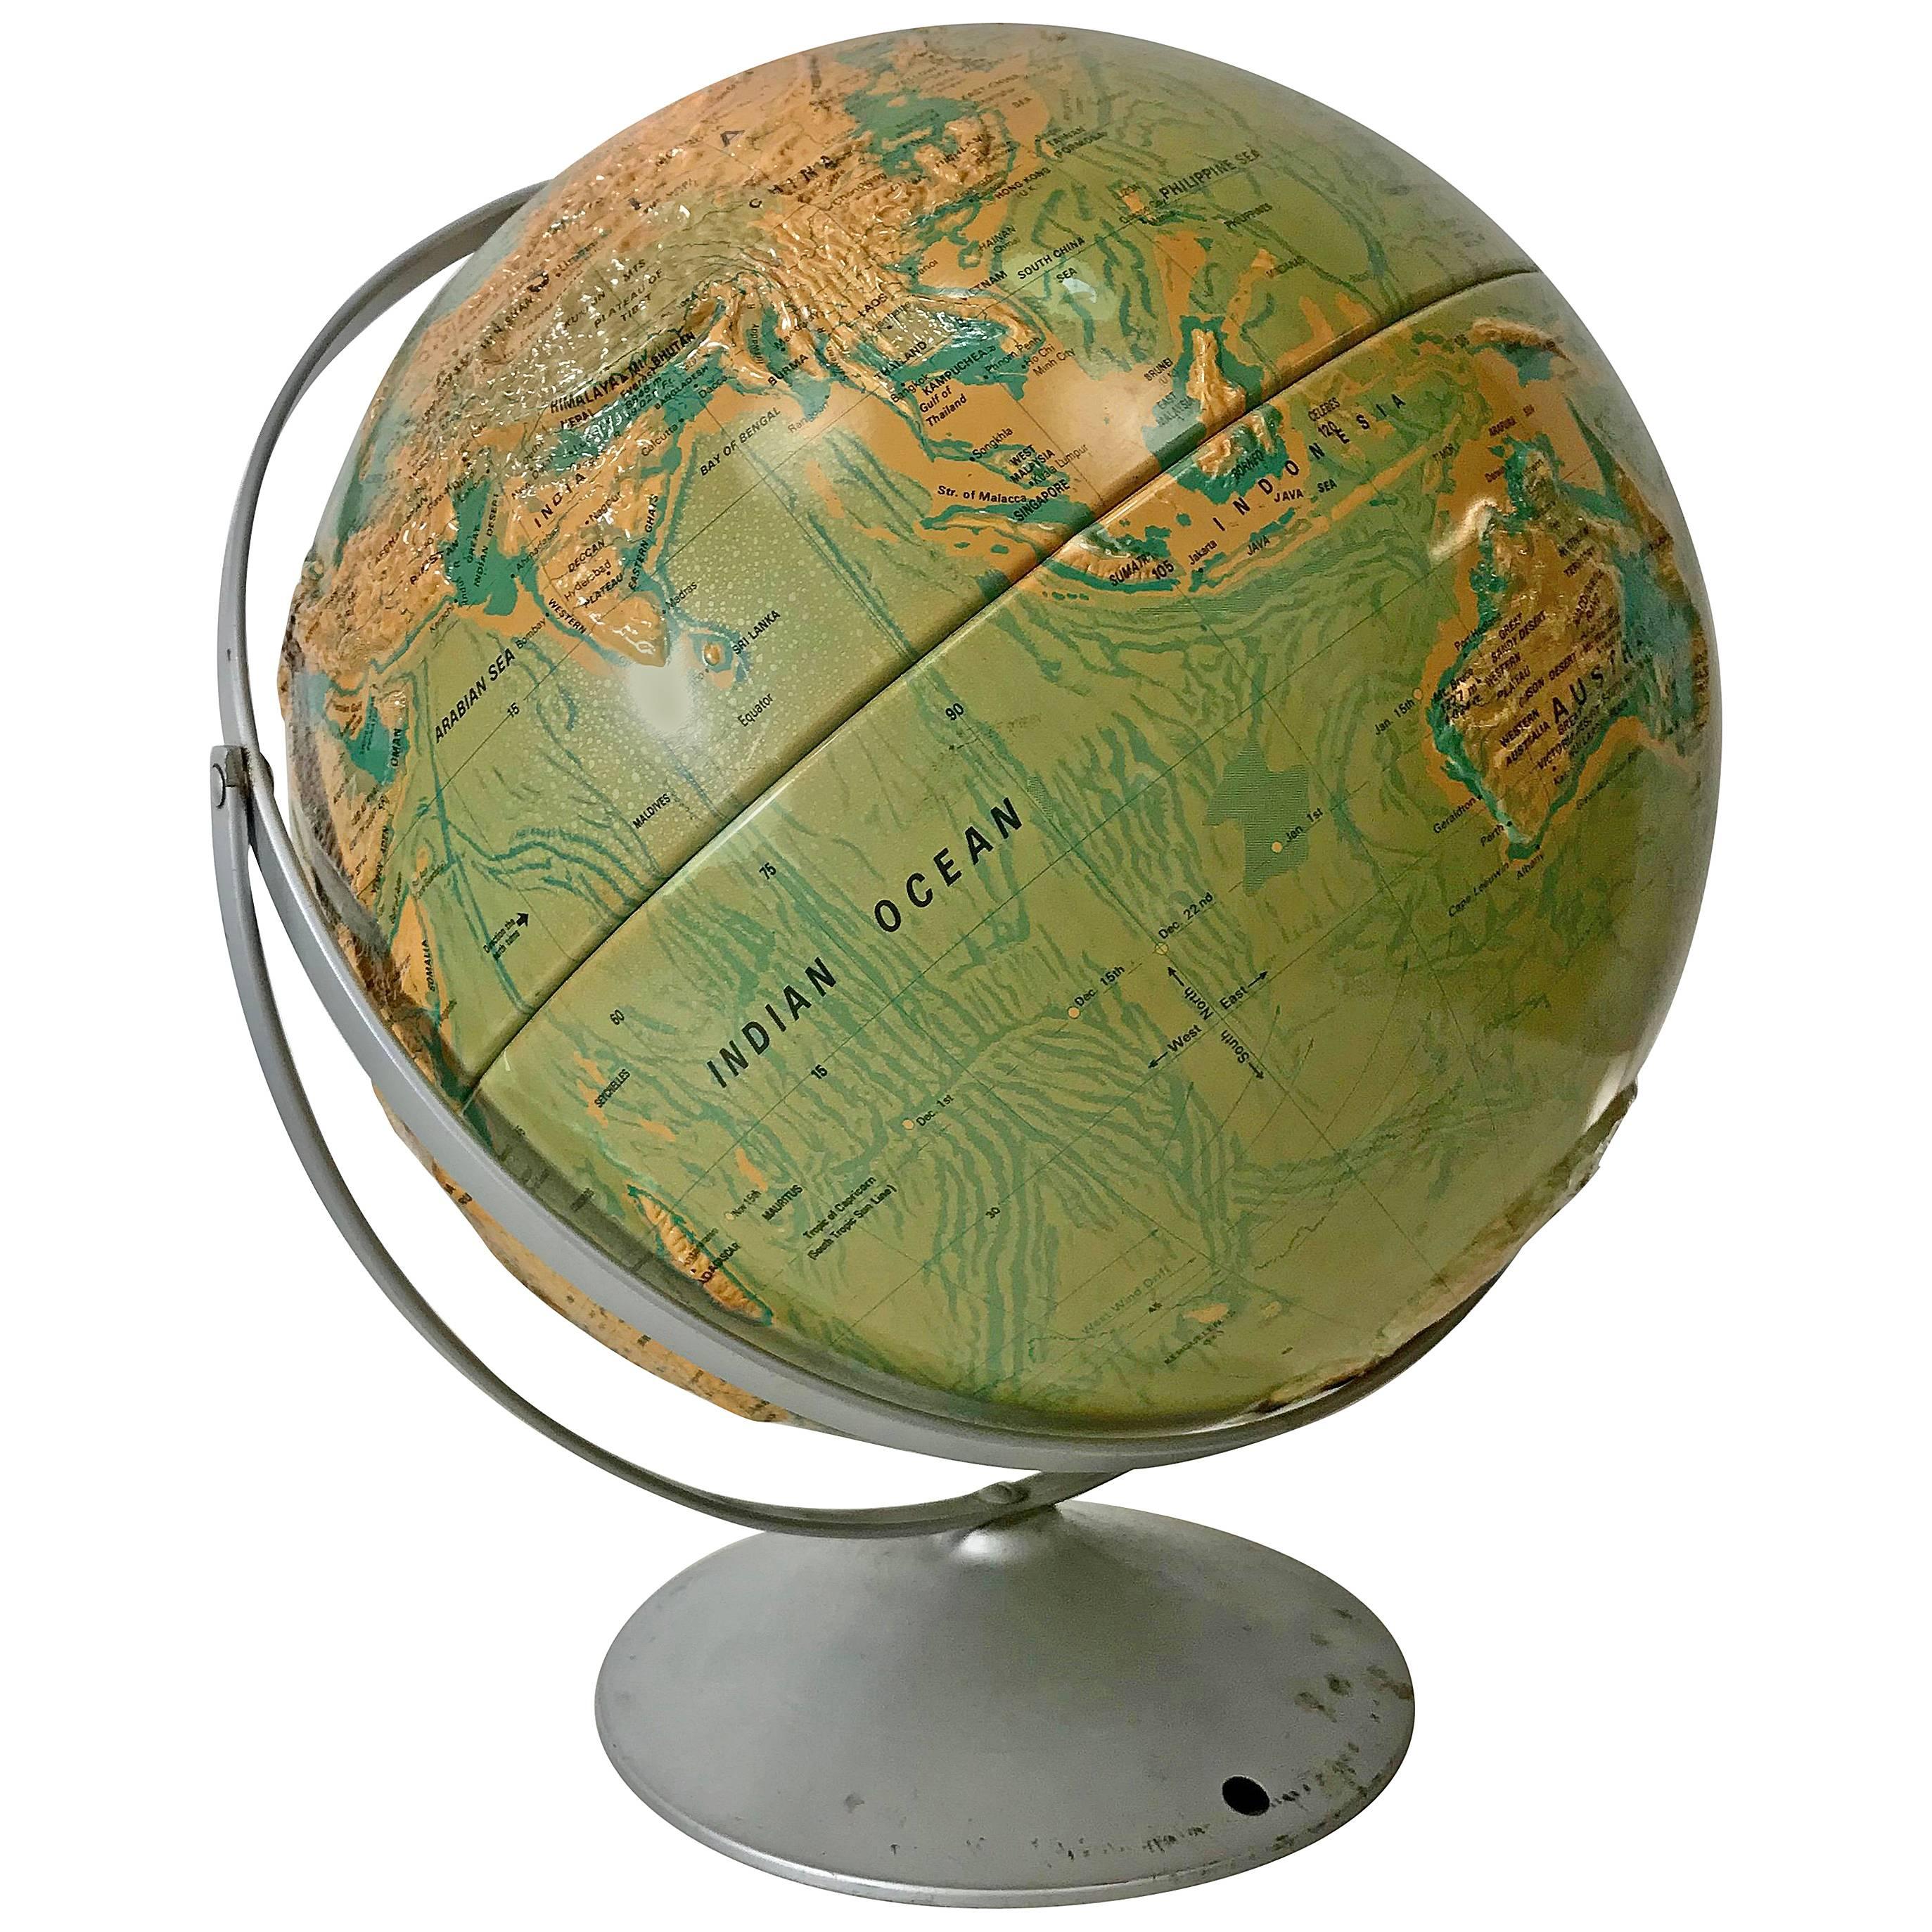 Sculptural Relief World Globe by Nystrom